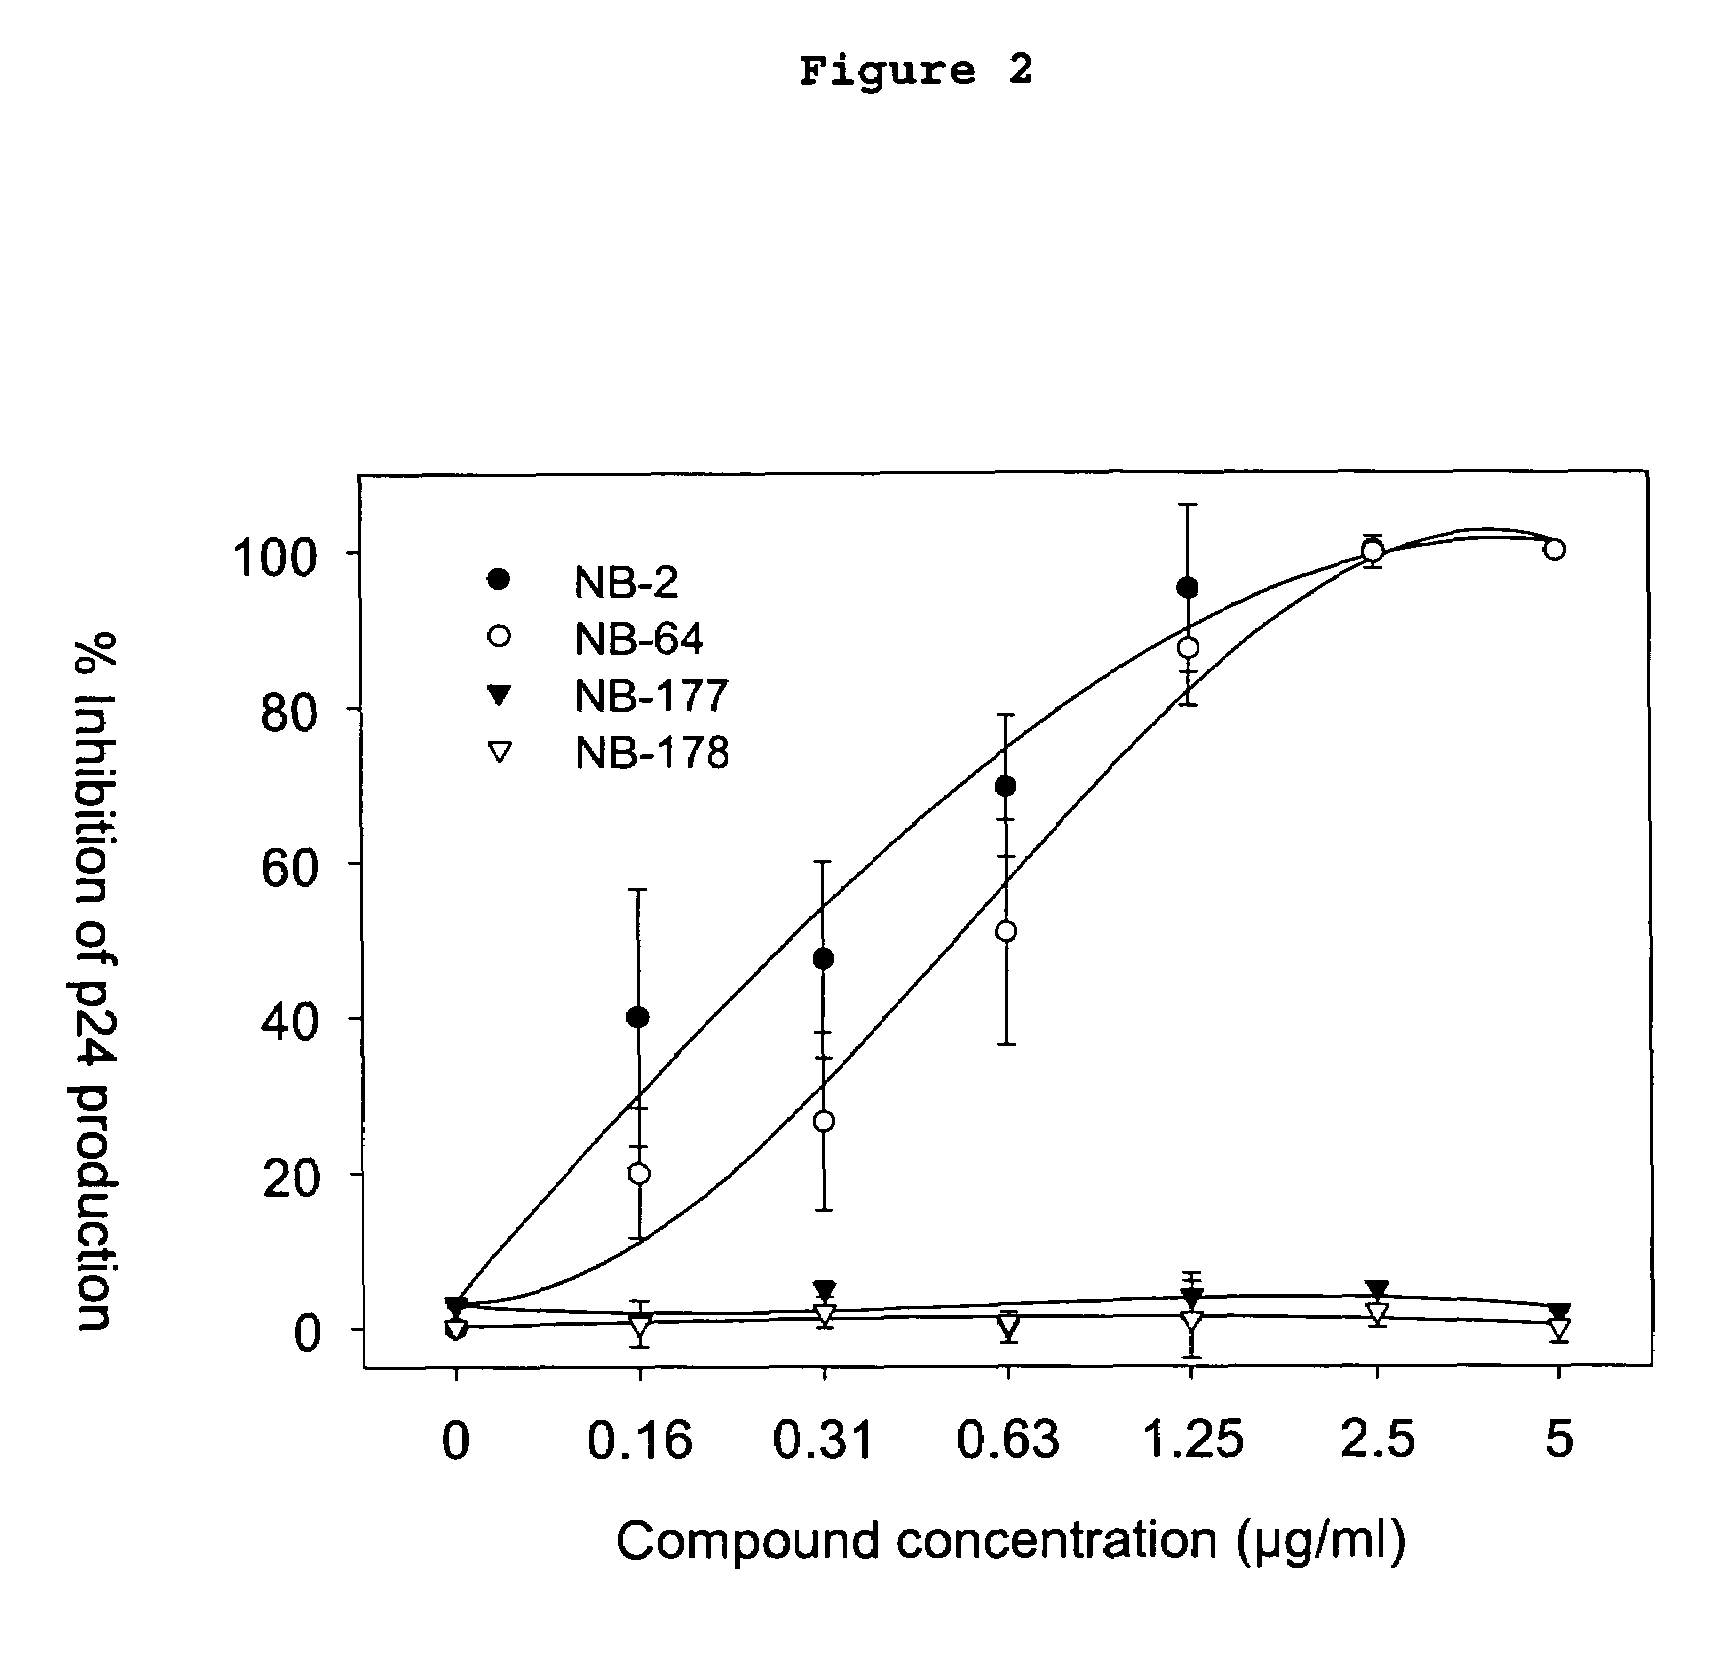 Compounds for inhibition of HIV infection by blocking HIV entry